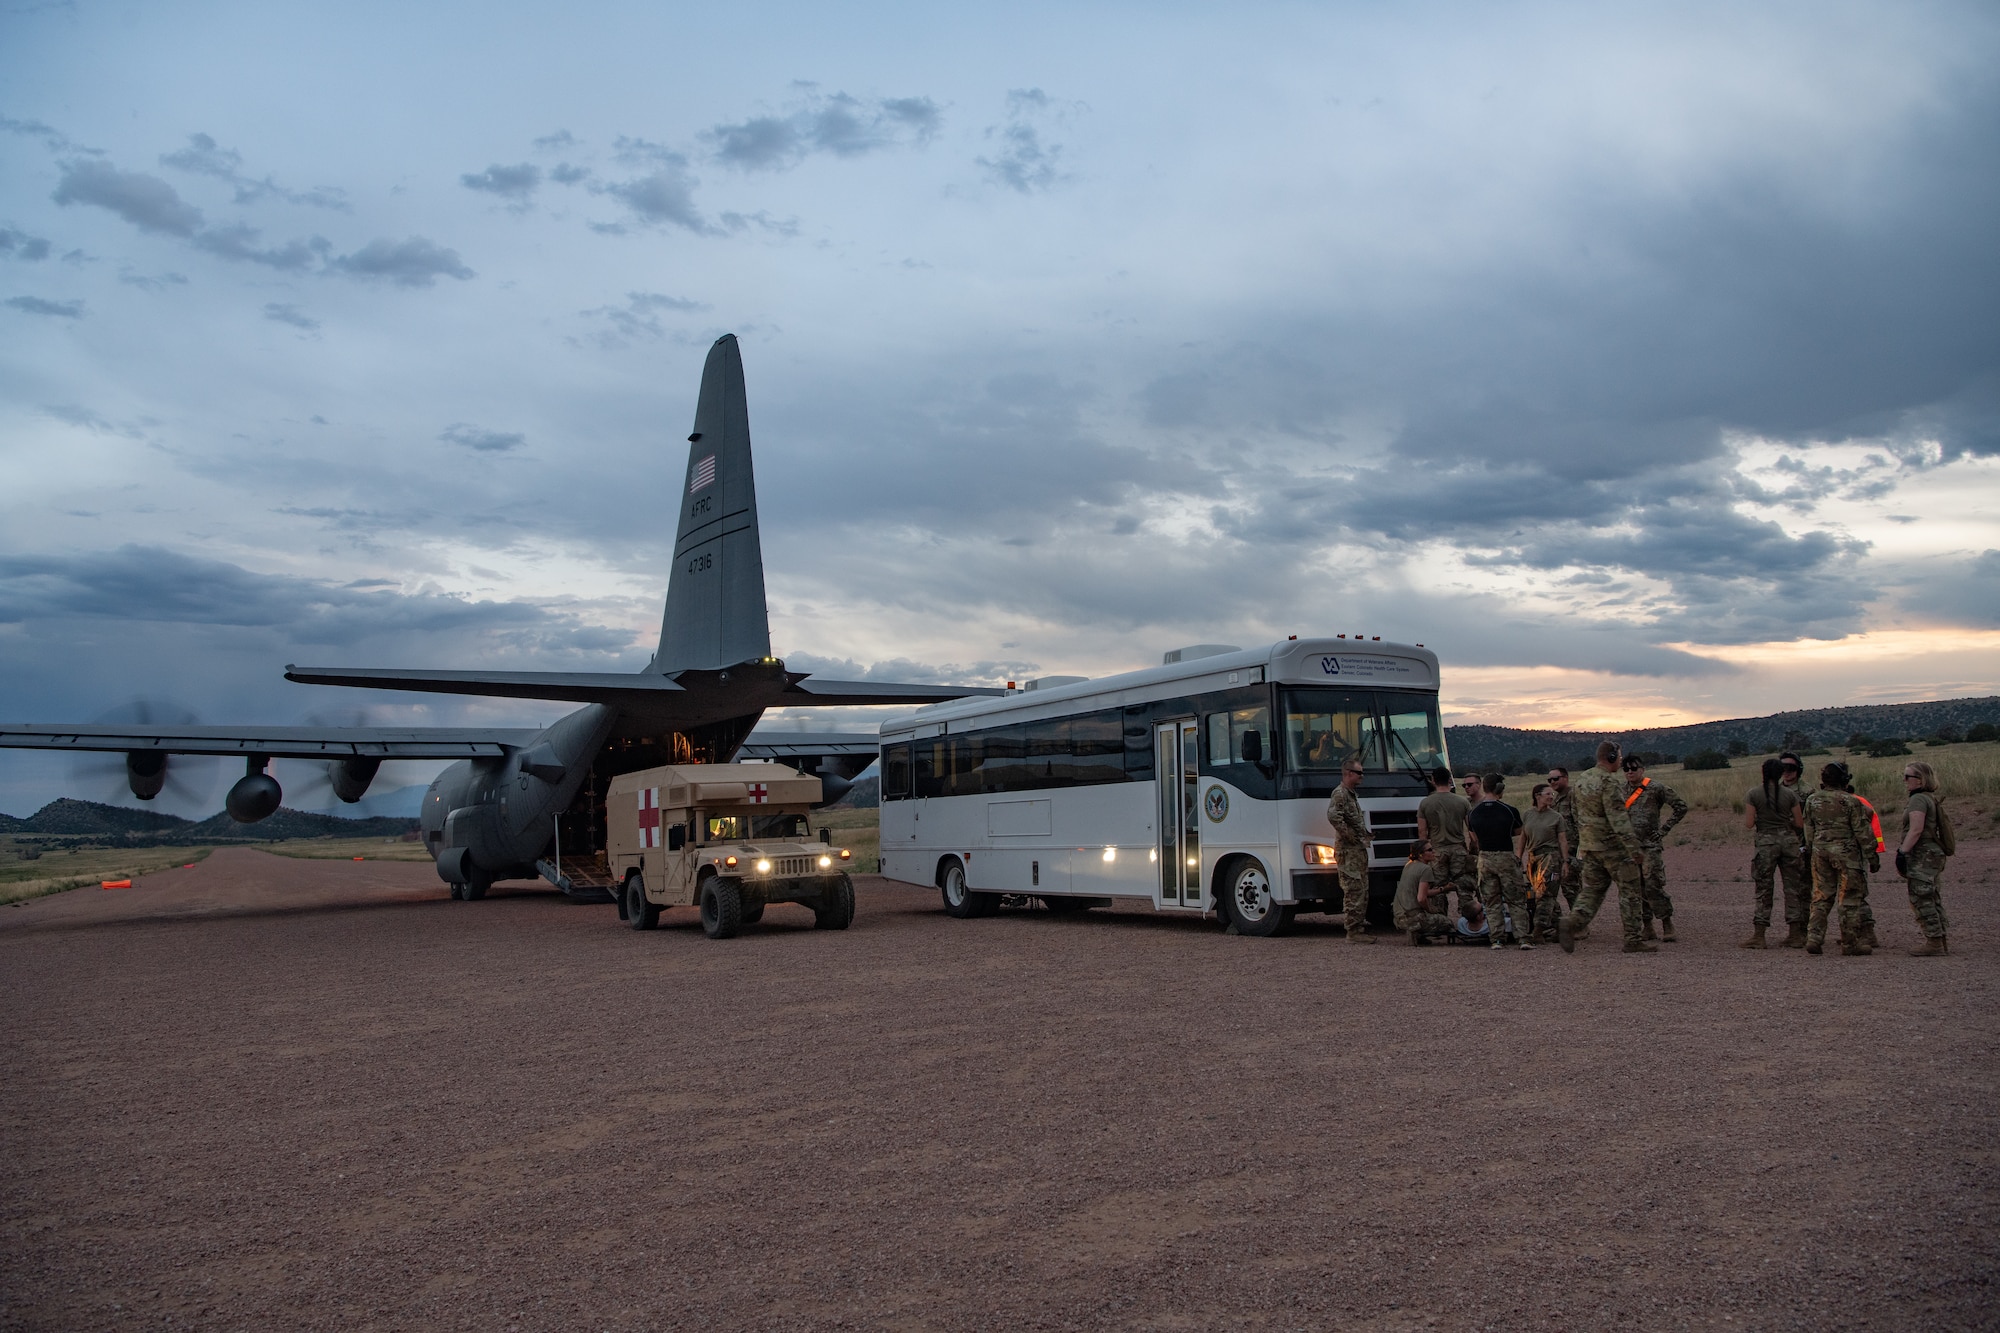 A white bus with military personnel in front of it and a military medevac truck parked behind a C-130 aircraft with its engines running.